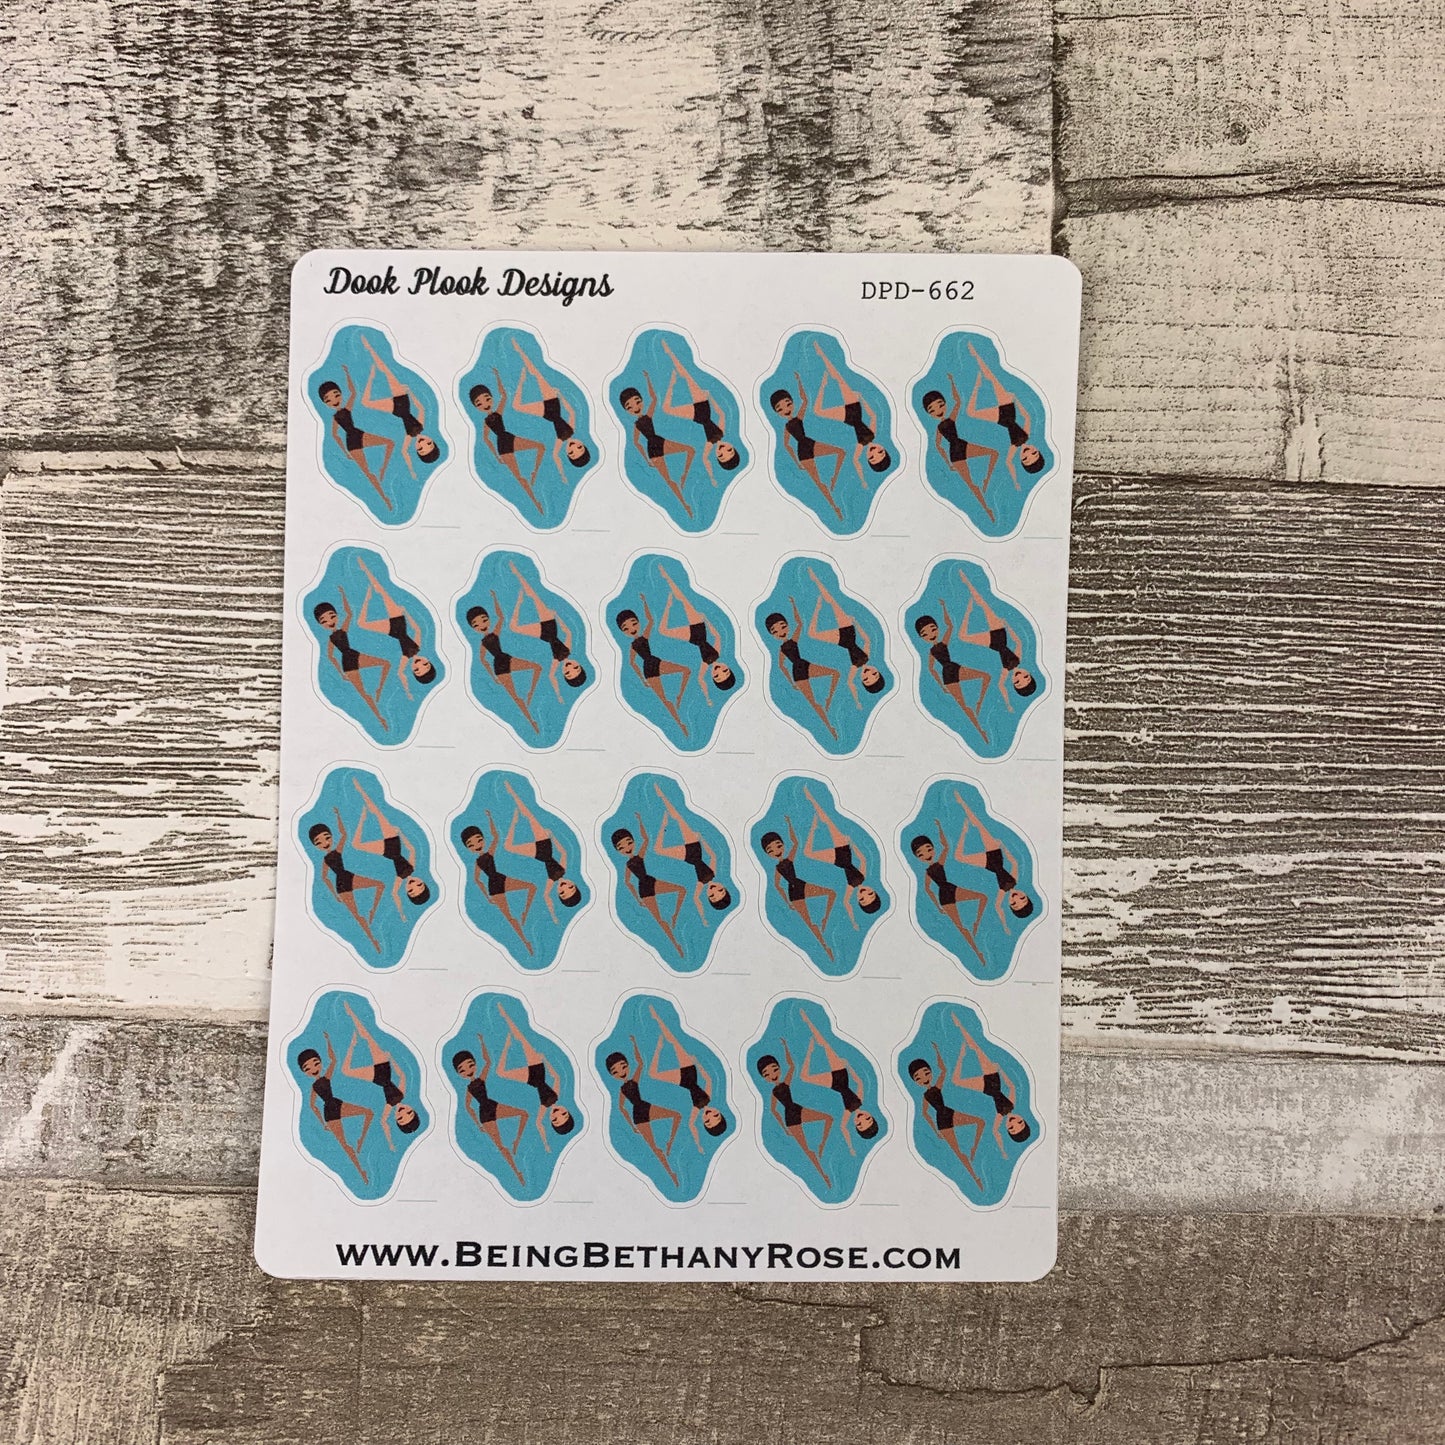 Synchronised swimming stickers (DPD662)